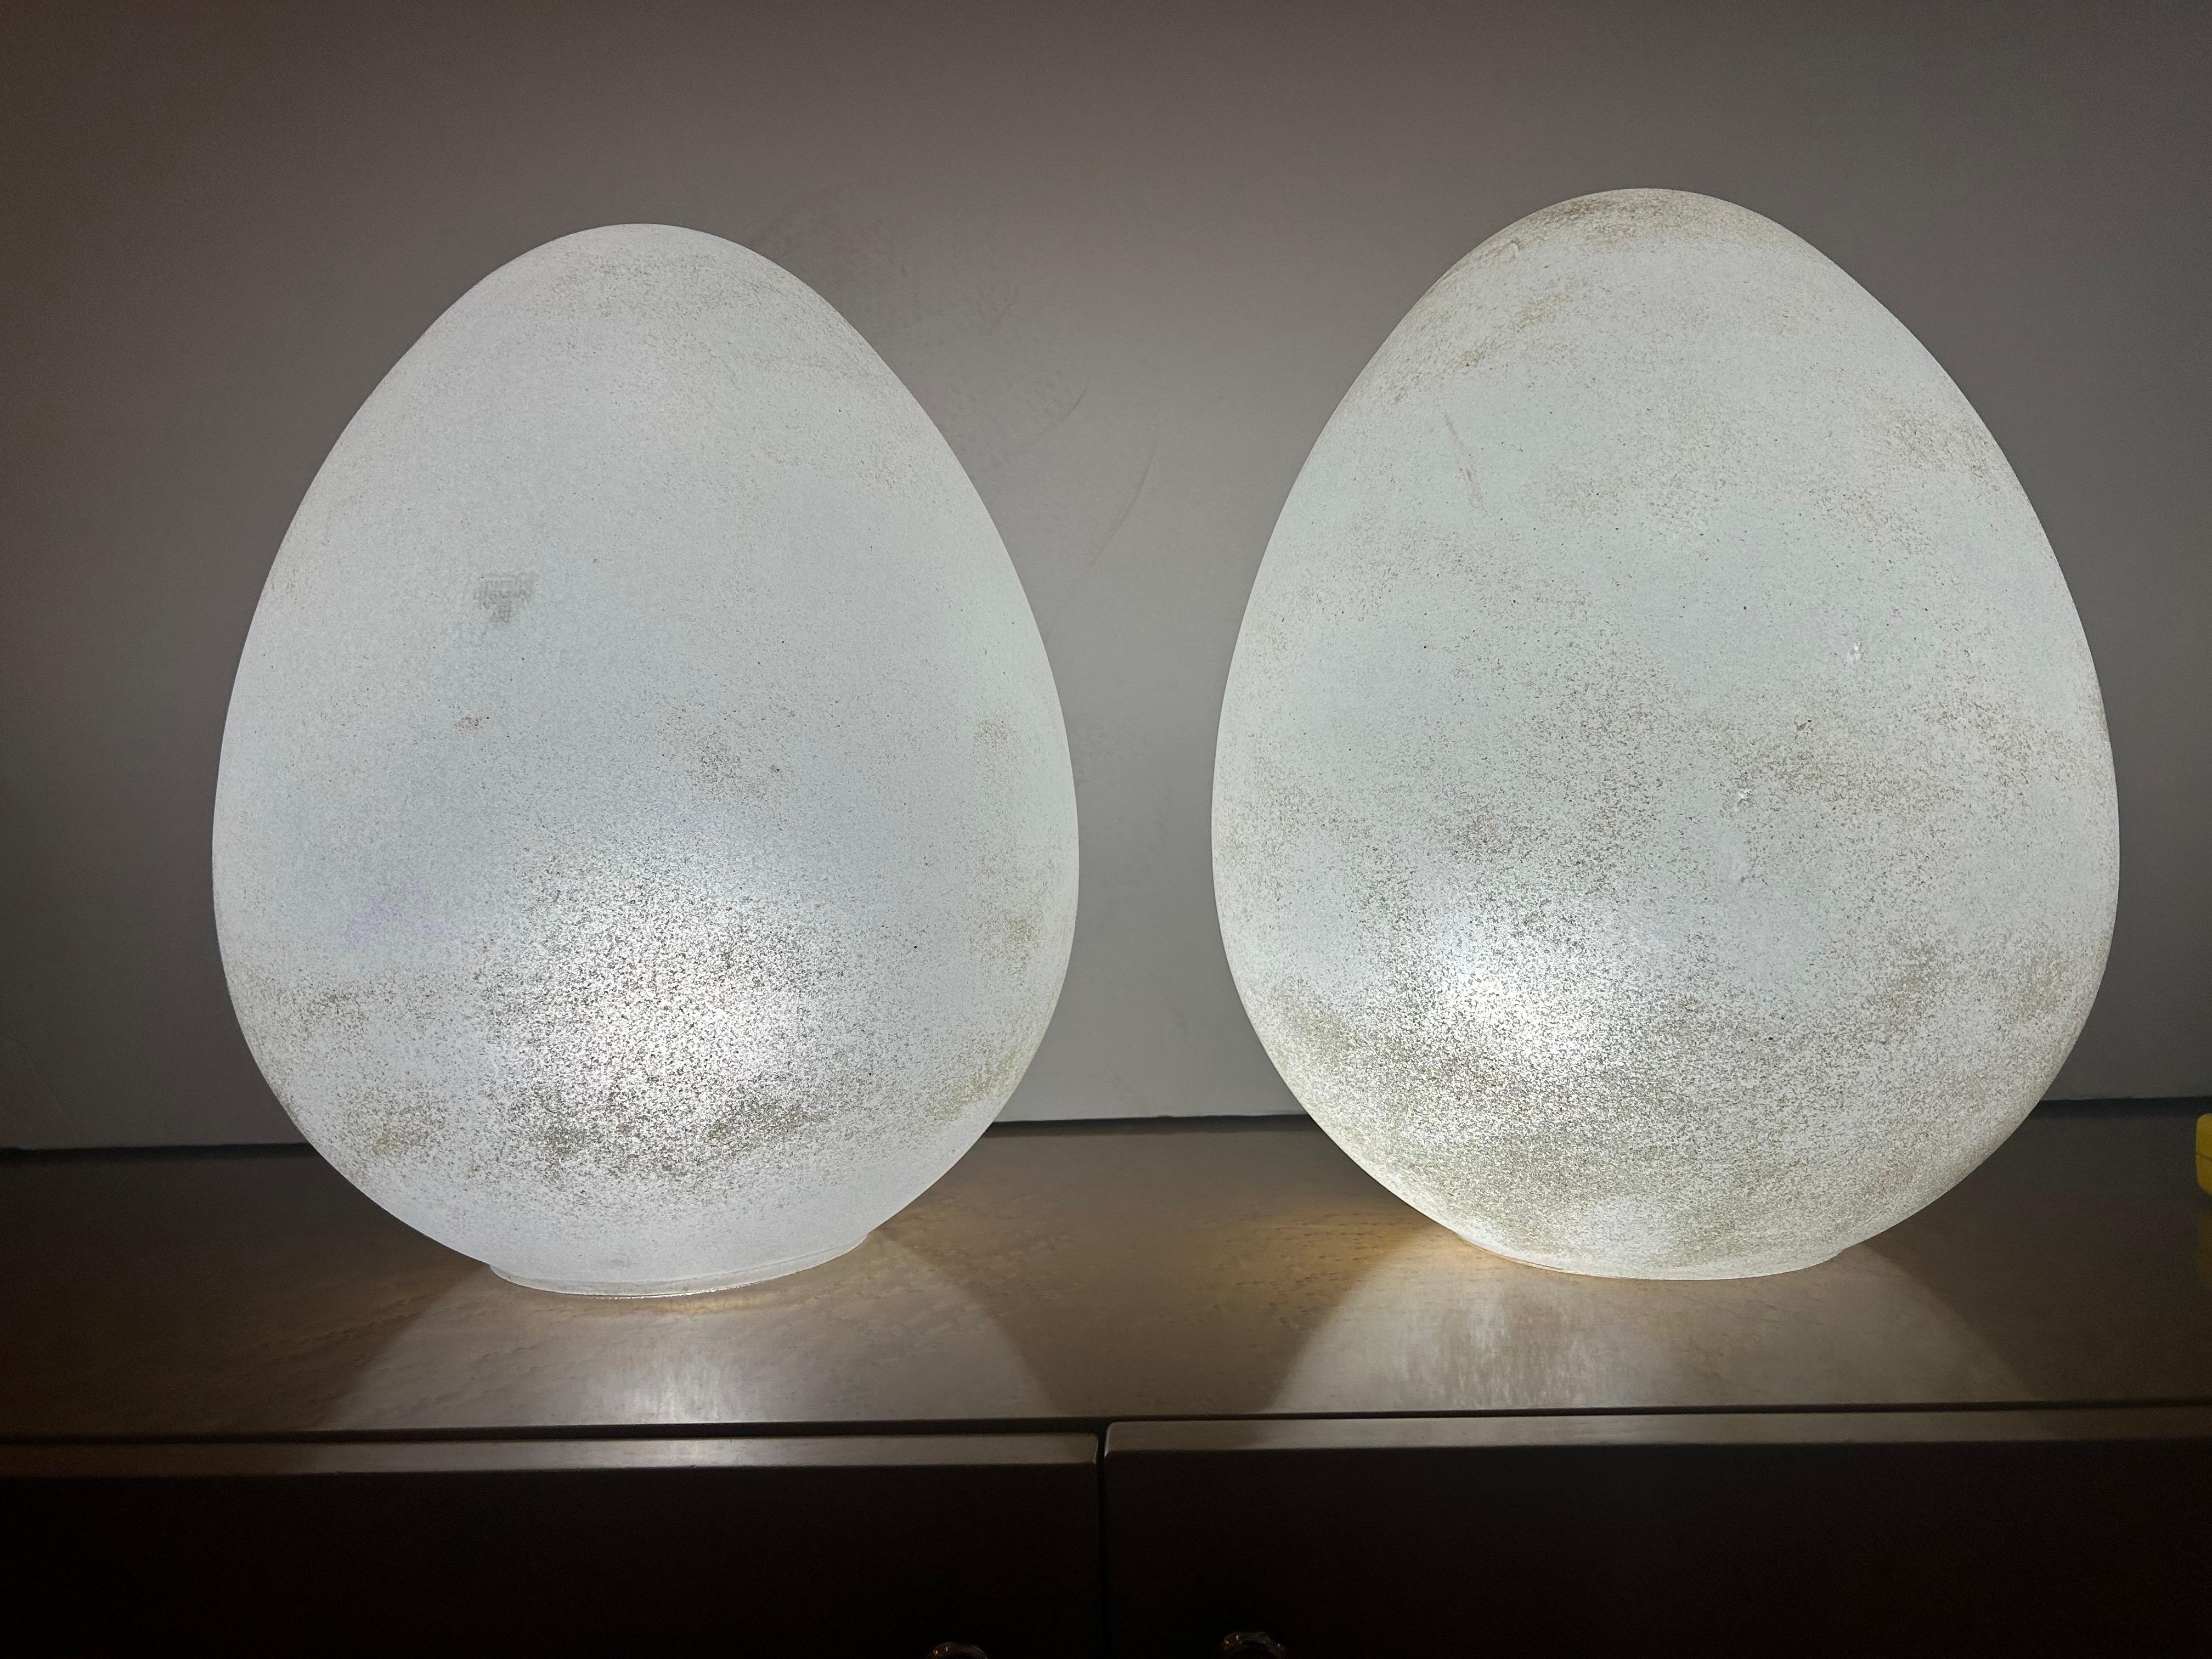 Pair of internally illuminated glass lamps, egg forms with rough Scavo finish attributed to Cendese , Murano Italy, 1970s